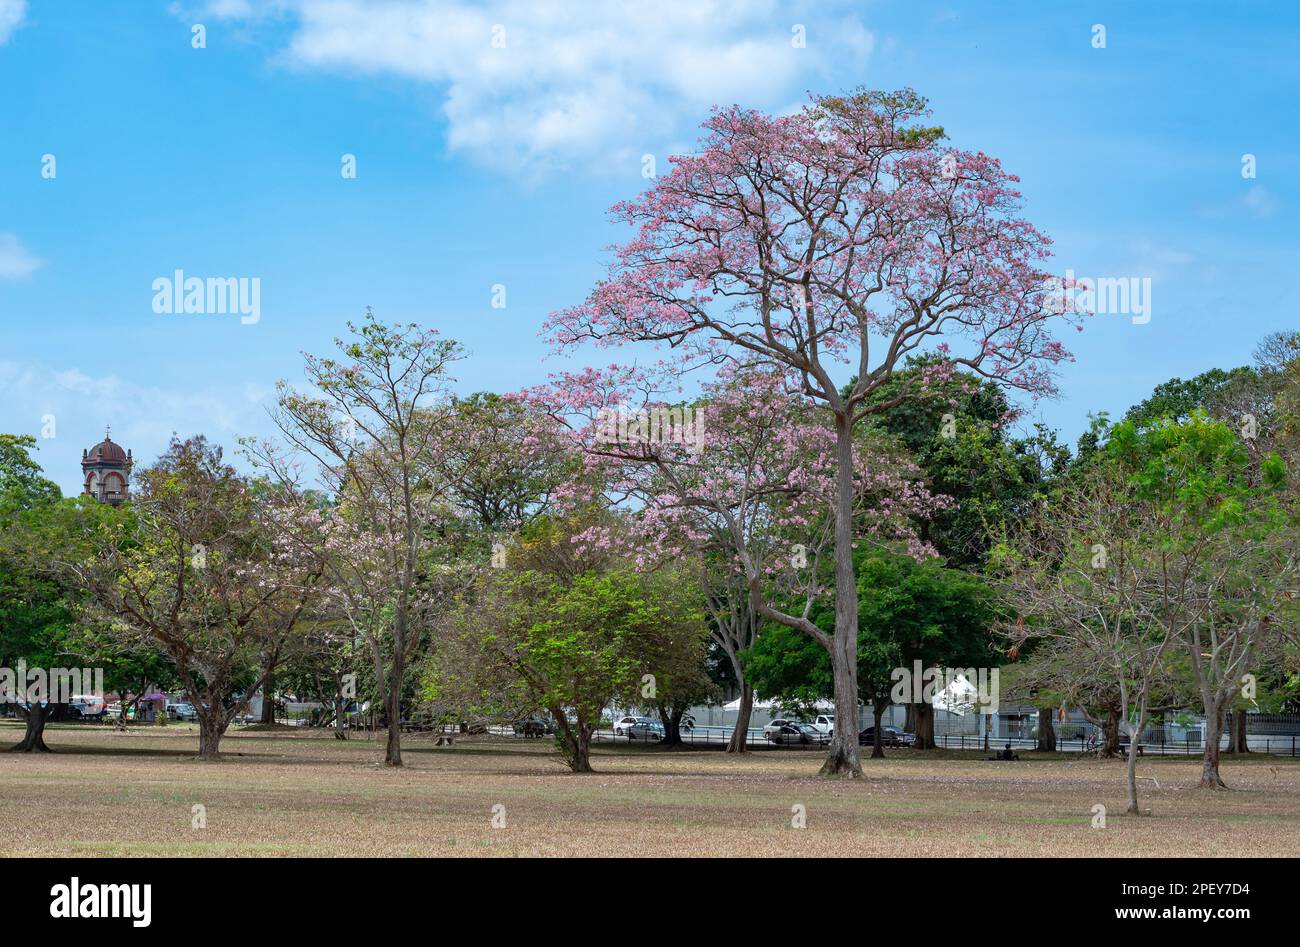 Trees in a park with pink flowers located in Queens Park Savannah, Trinidad and Tobago. Stock Photo